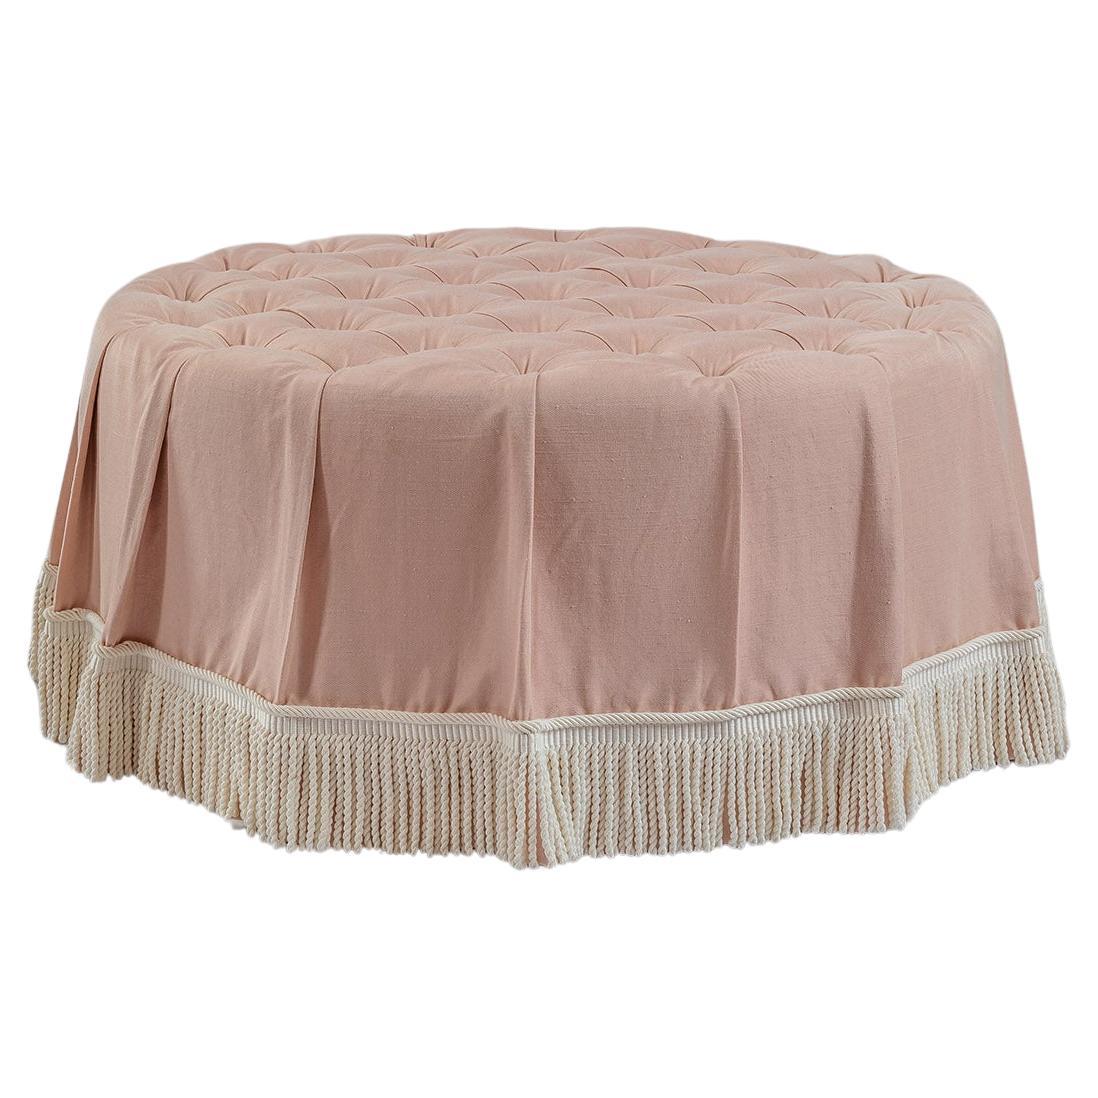 The Amelia Ottoman in deep buttoned pink linen, ticking stripe & bullion fringe For Sale